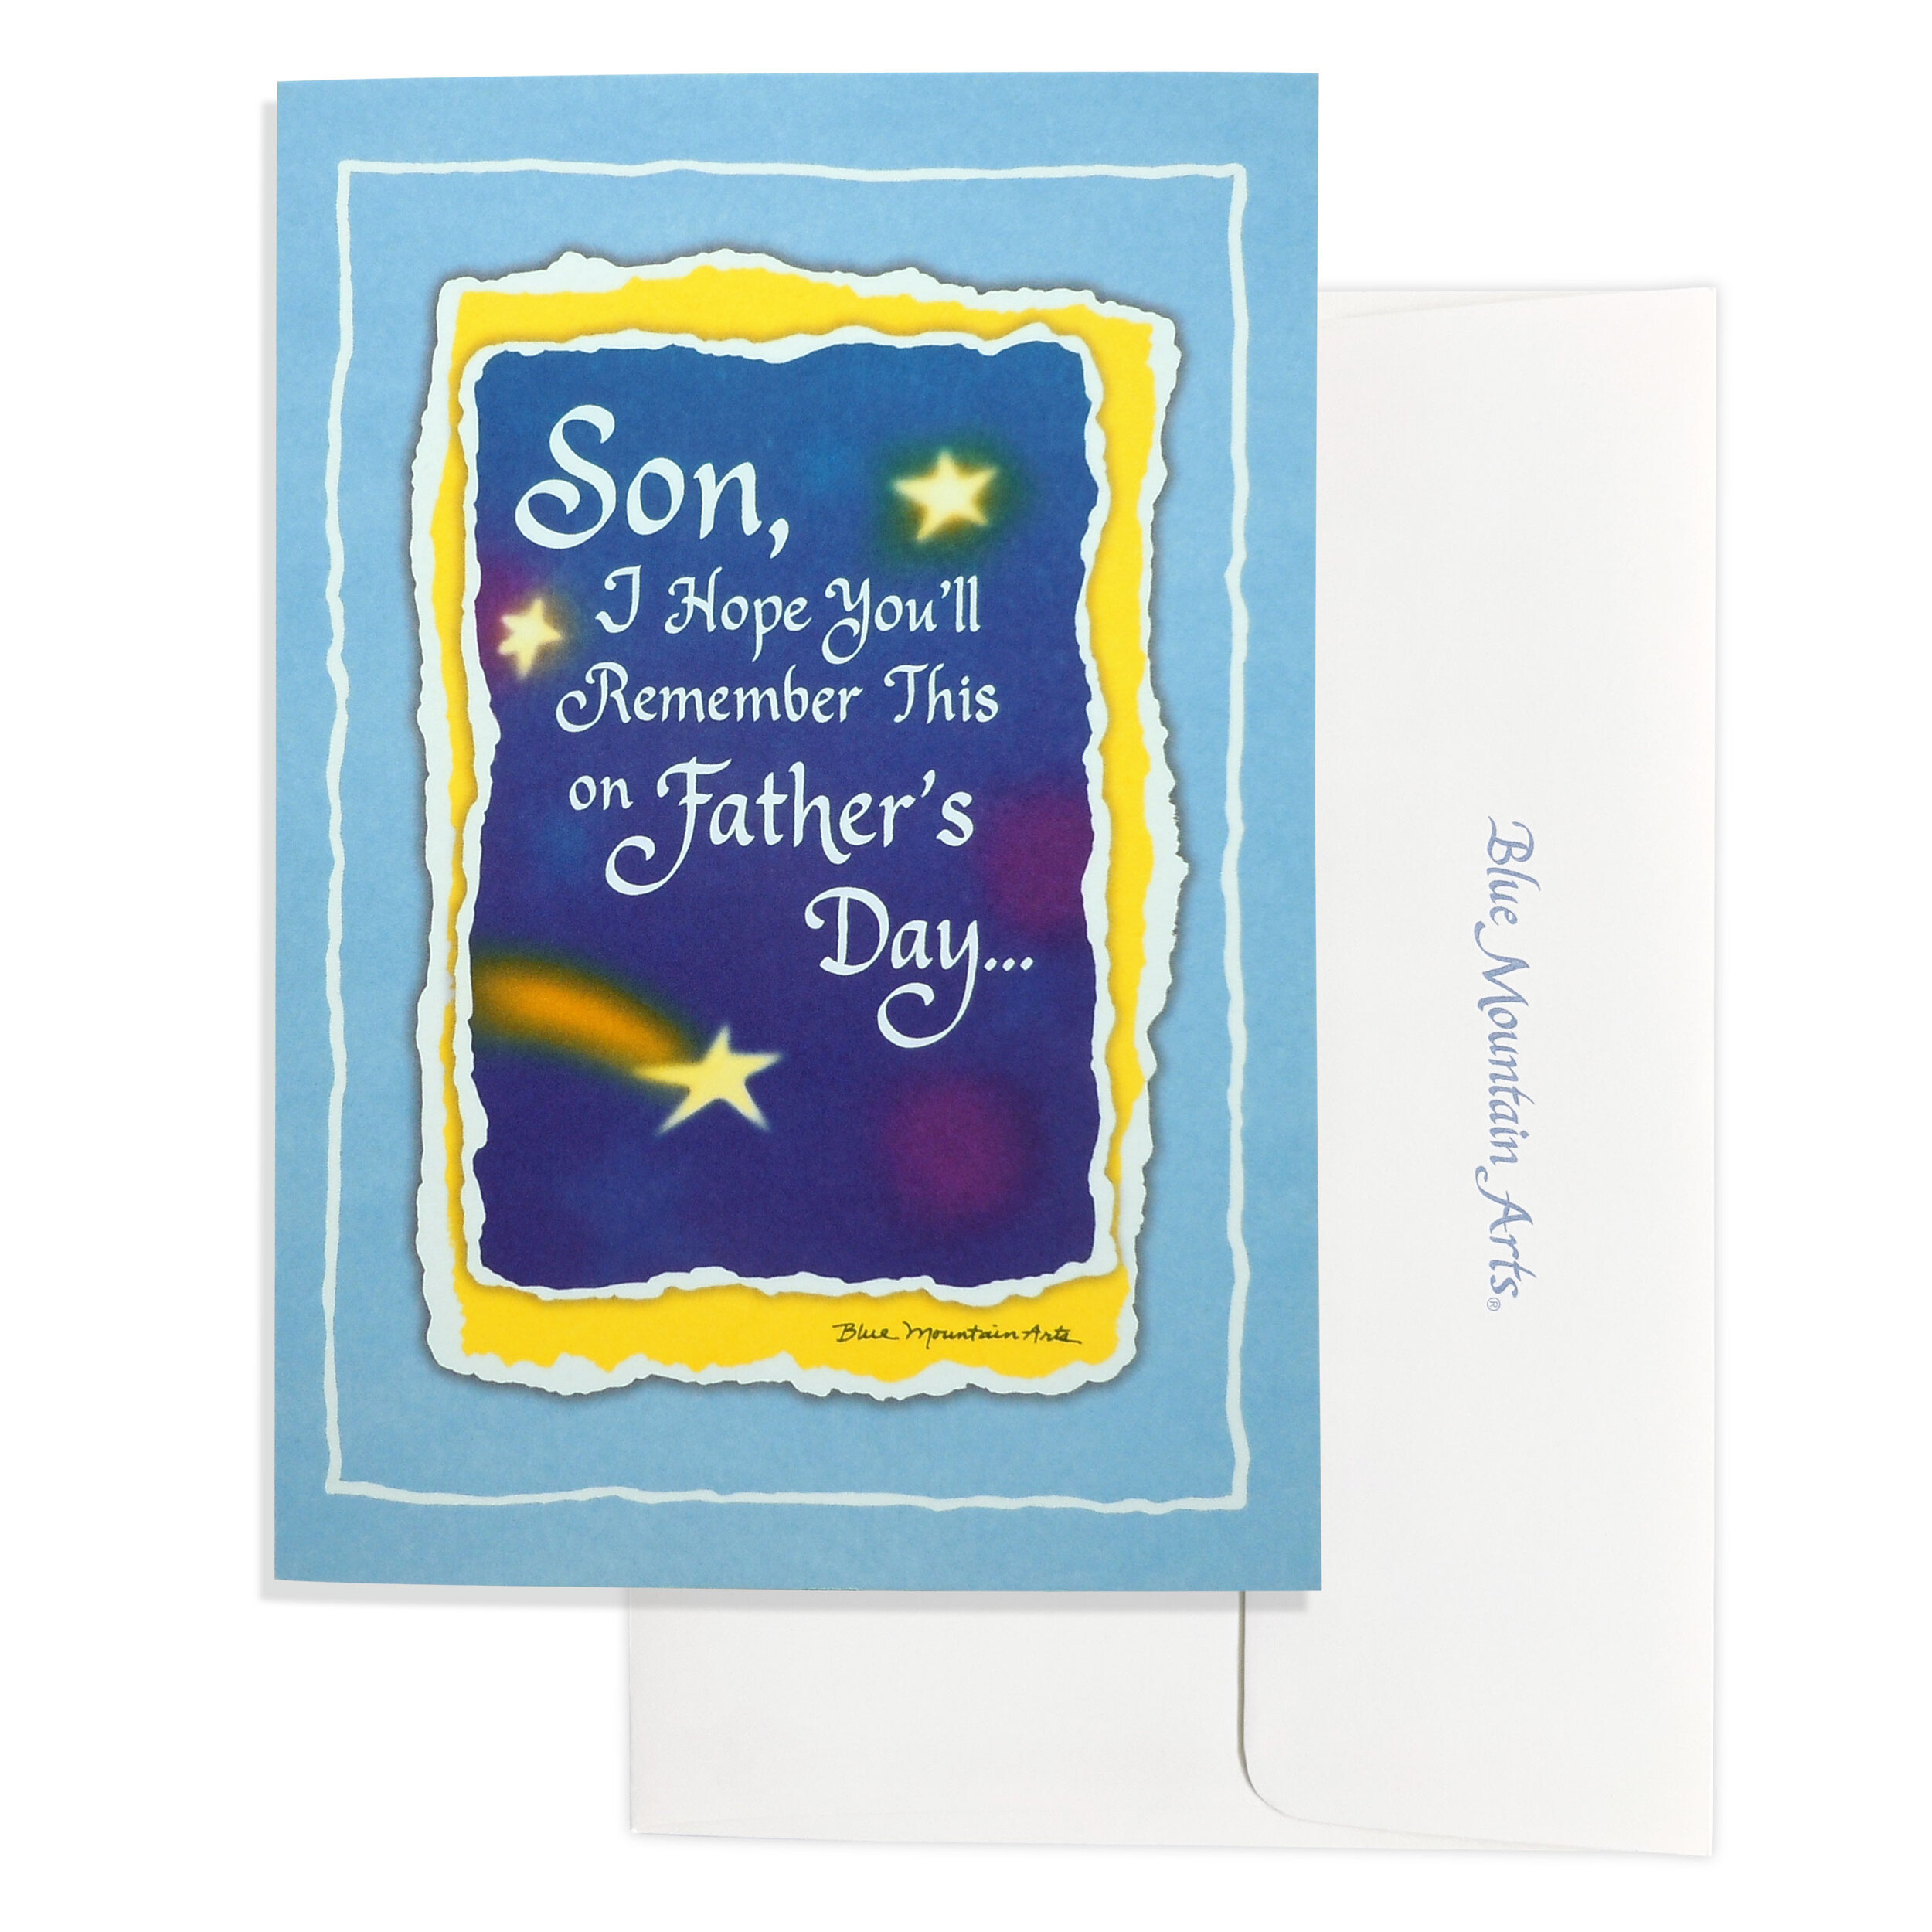 Details about   Hallmark Happy Father's Day Son Today is Your Day Greeting Cards Blues Tones 